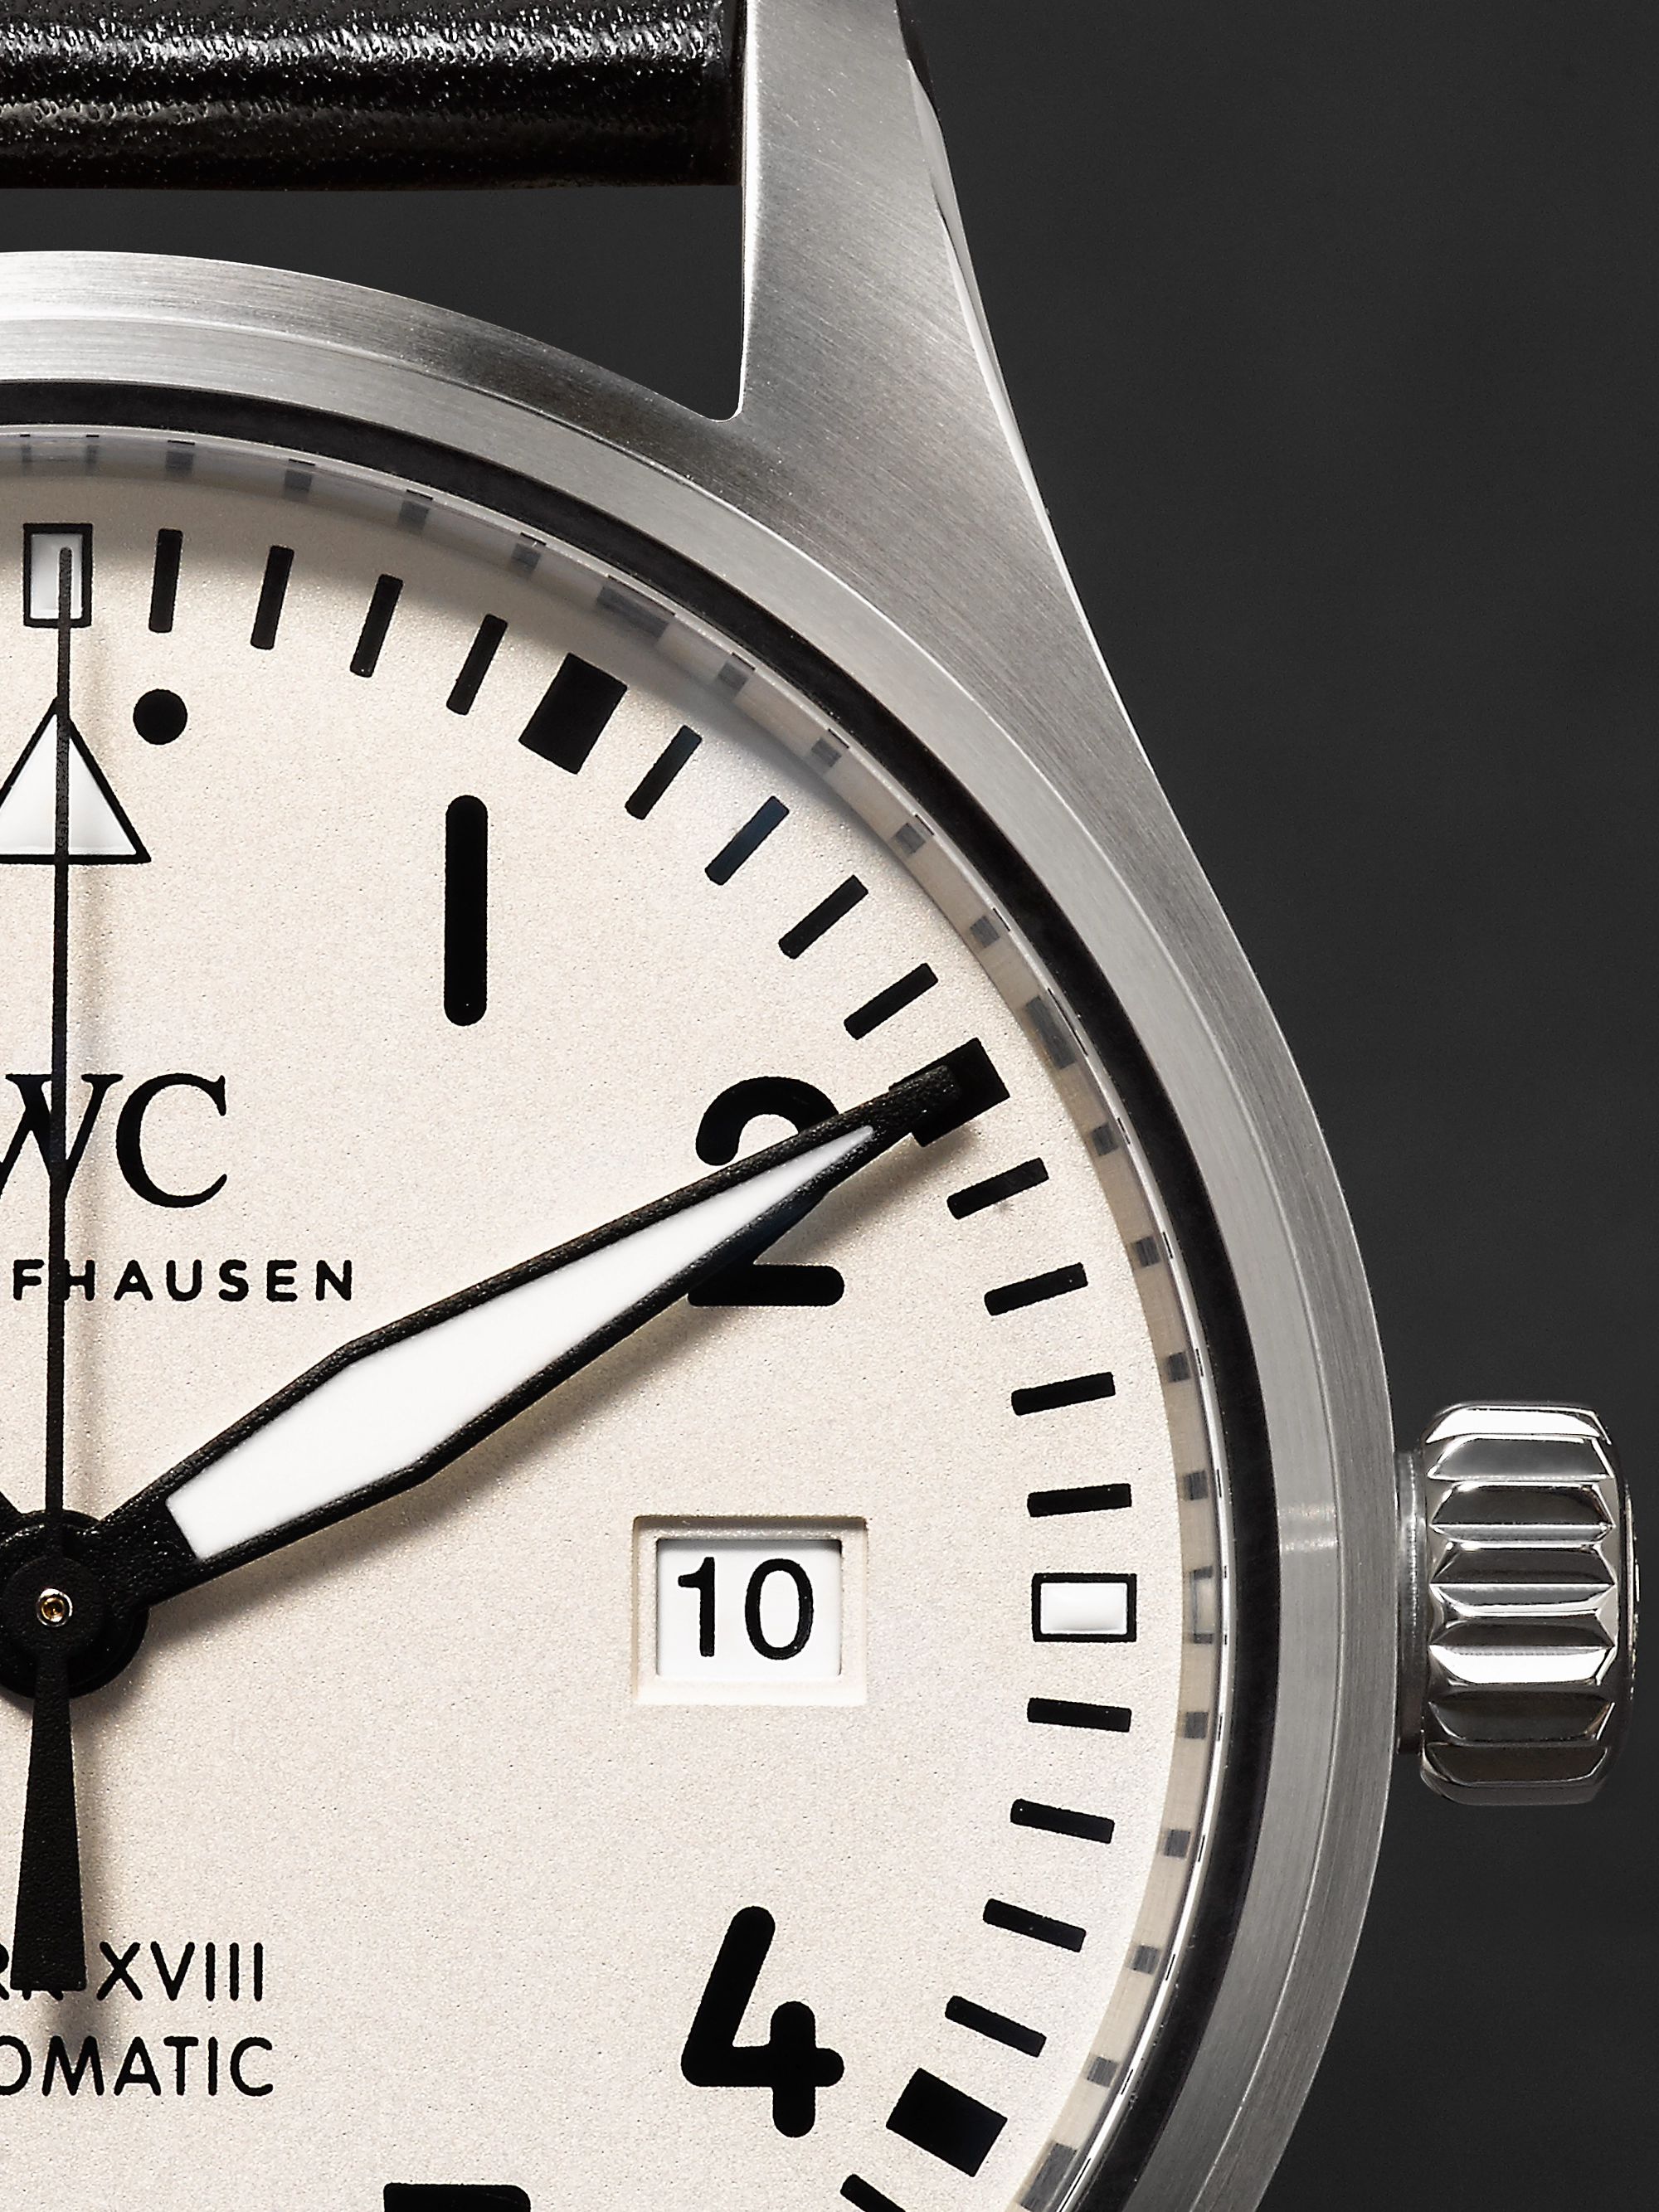 IWC SCHAFFHAUSEN Pilot's Mark XVIII Automatic 40mm Stainless Steel and Leather Watch, Ref. No. IW327002